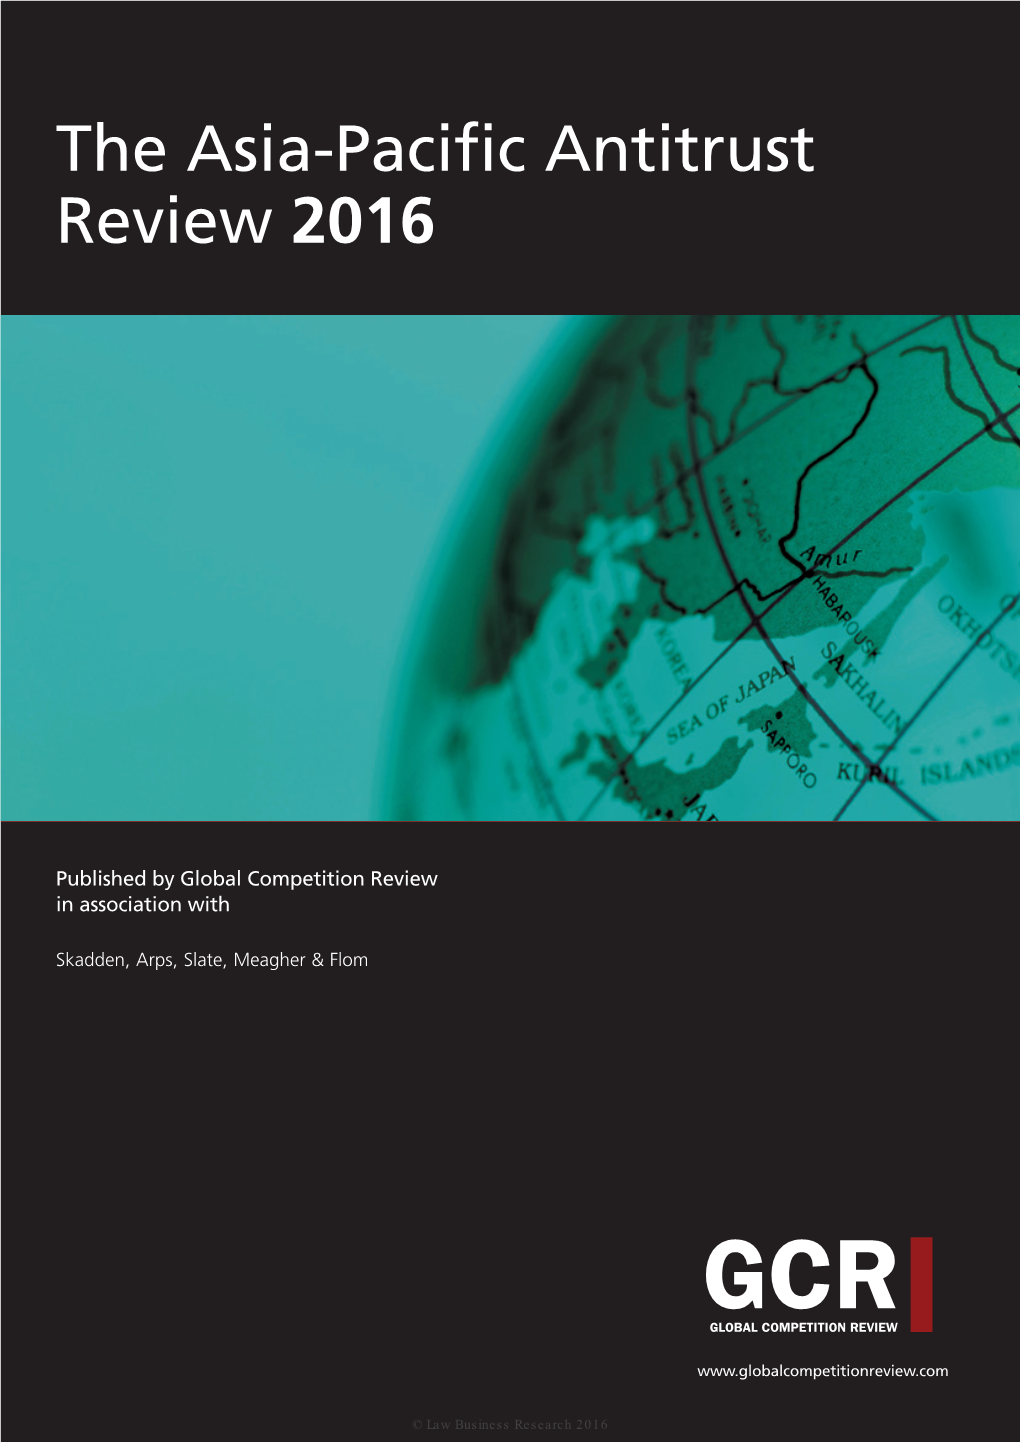 The Asia-Pacific Antitrust Review 2016